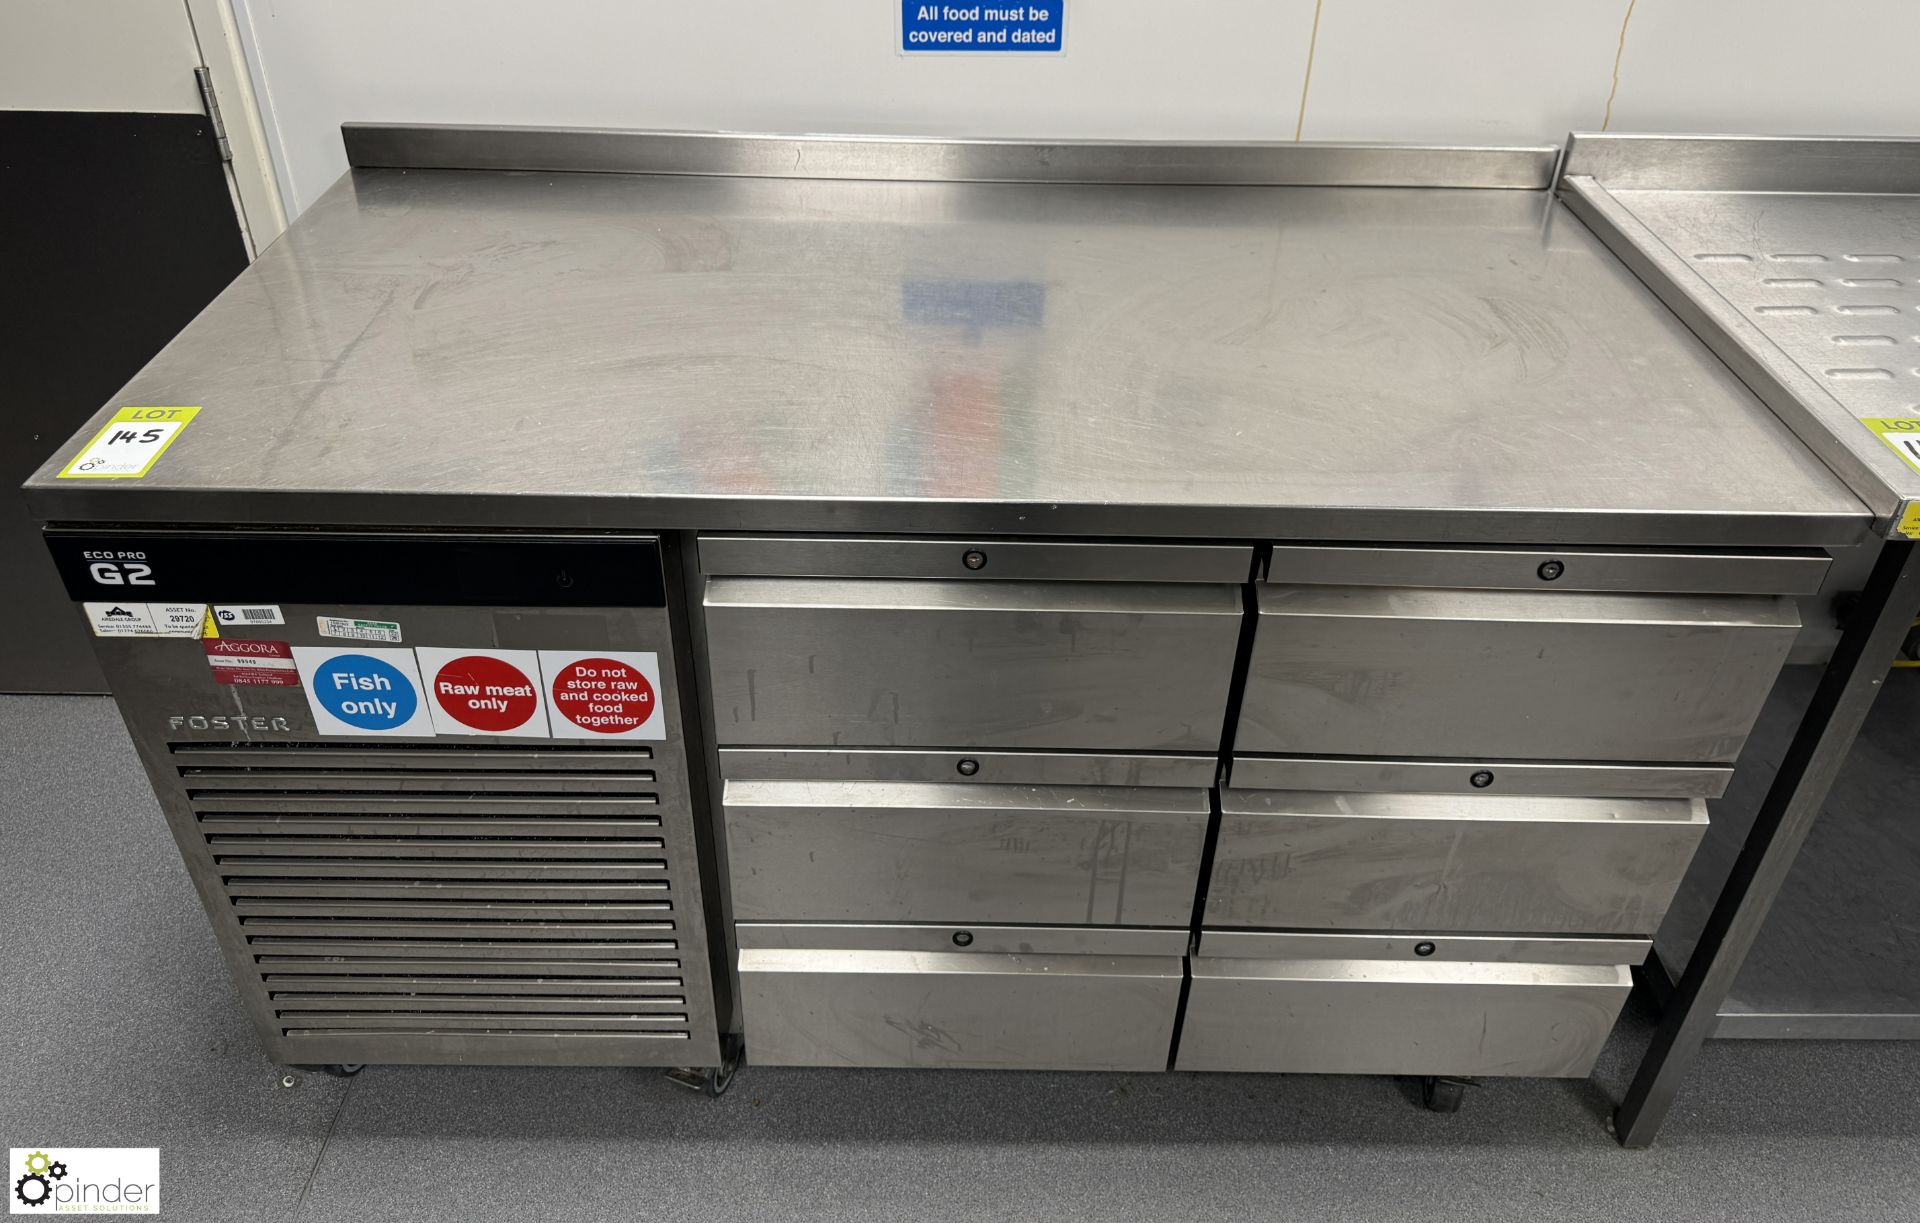 Foster Eco Pro G2 stainless steel mobile 6-drawer Chilled Counter, 240volts, 1400mm x 700mm x - Image 2 of 6